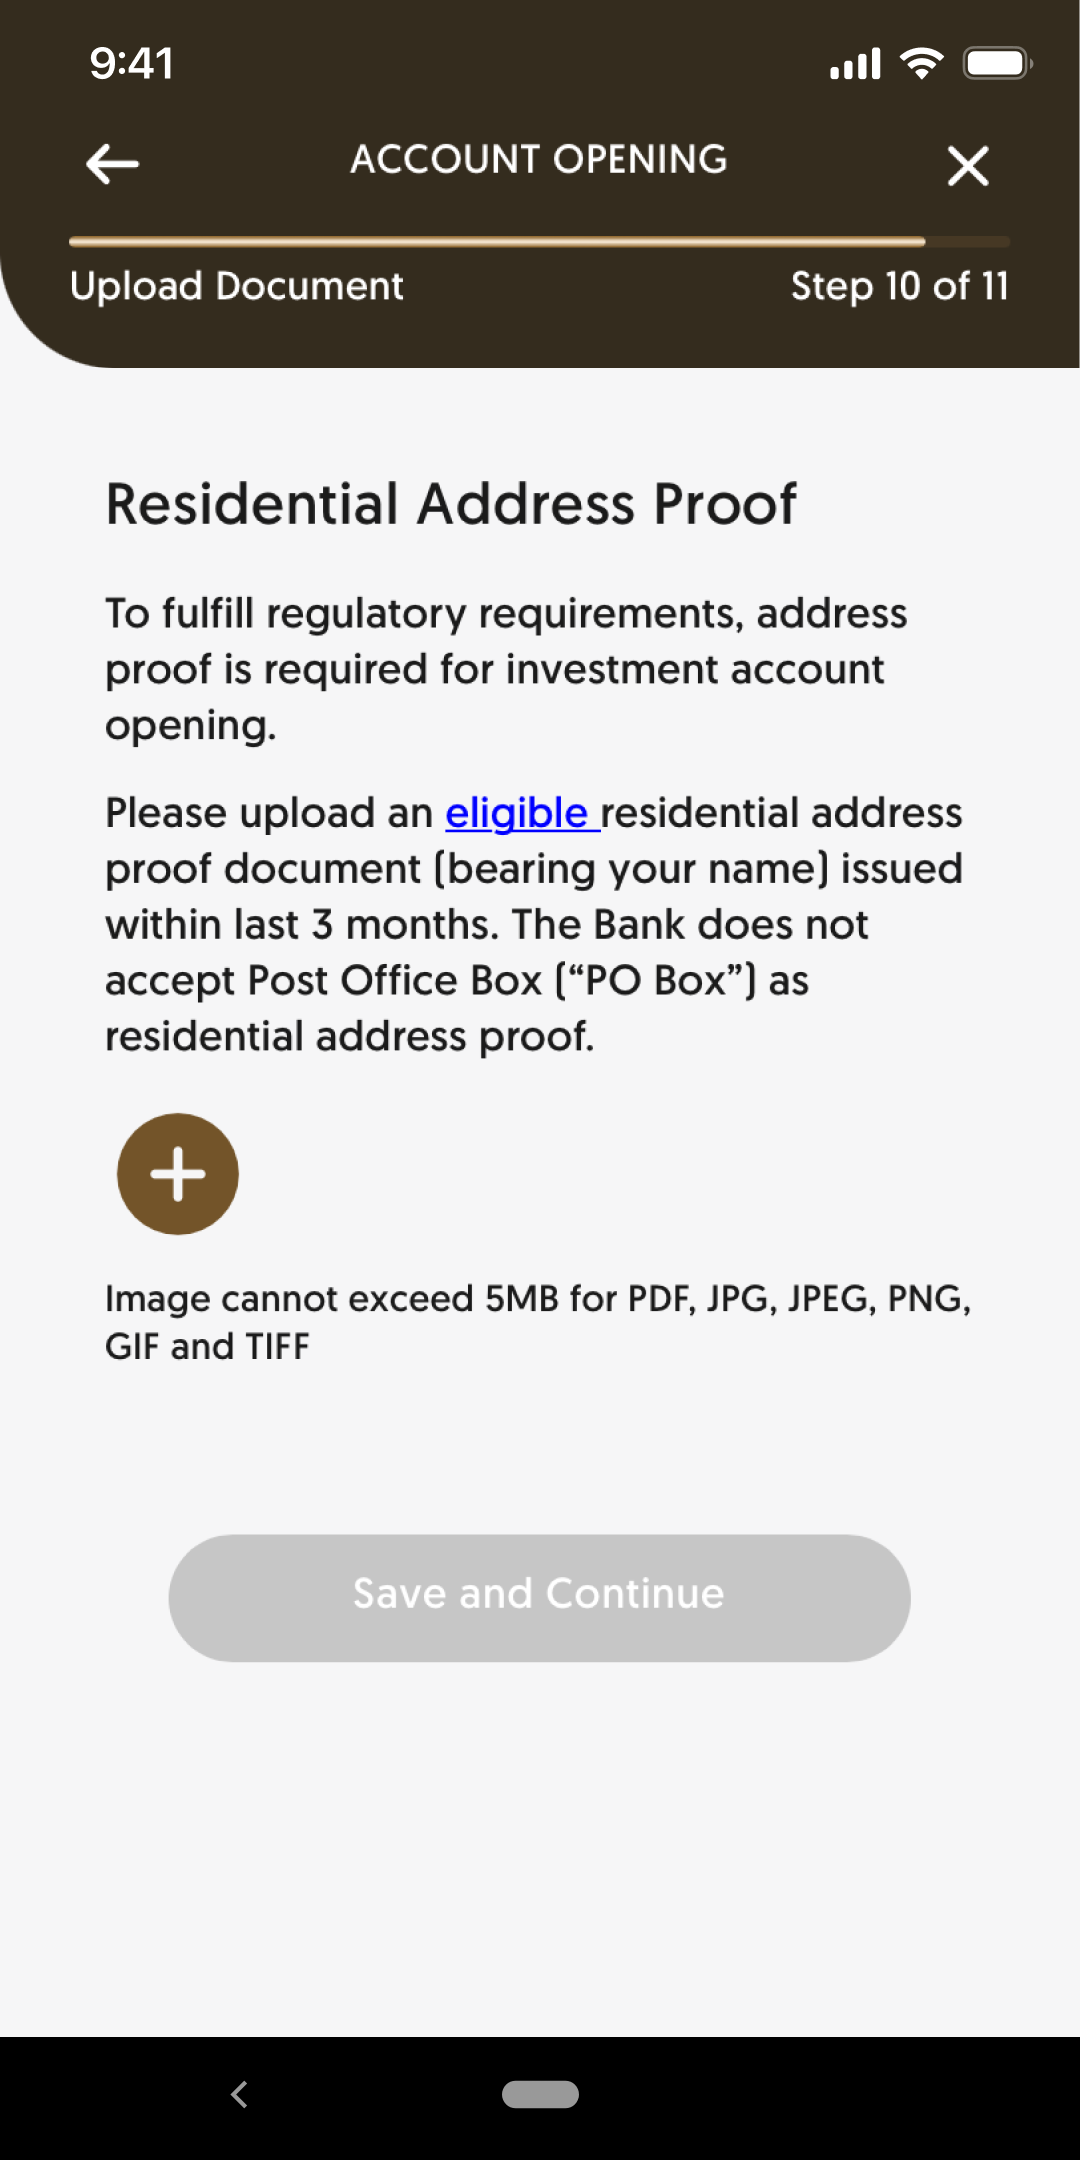 Upload residential address proof (applicable to the opening of All-in-one investment account)